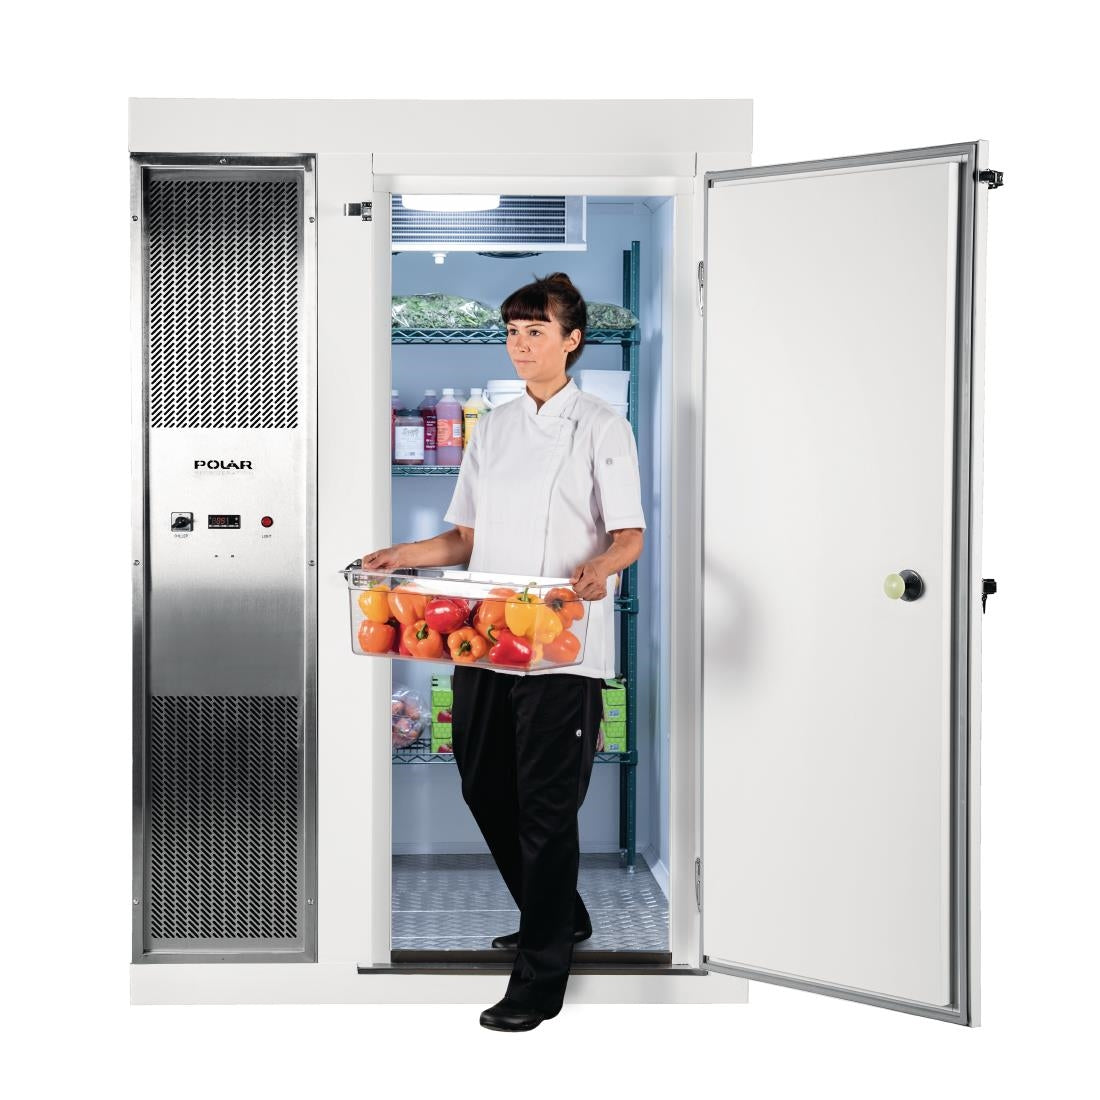 DS481-CWH Polar U-Series 1.5 x 1.2m Integral Walk In Cold Room White JD Catering Equipment Solutions Ltd